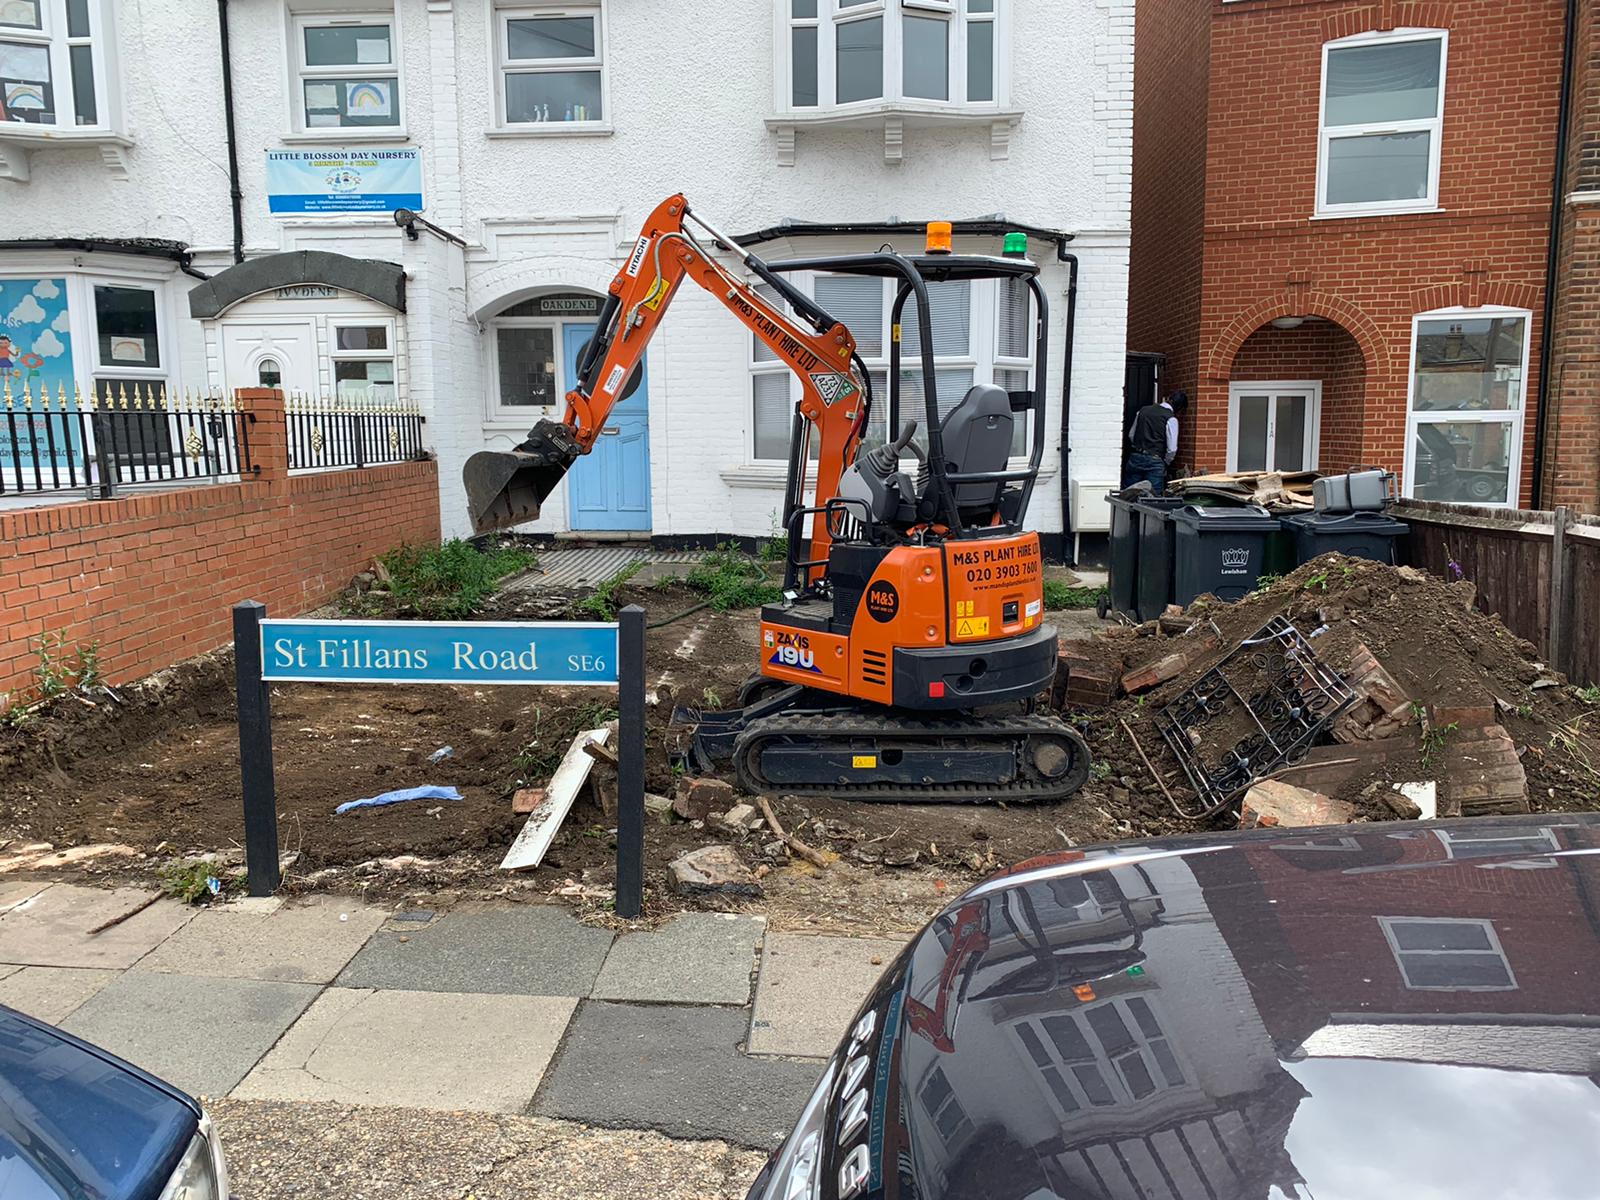 Plant Hire company in Reading